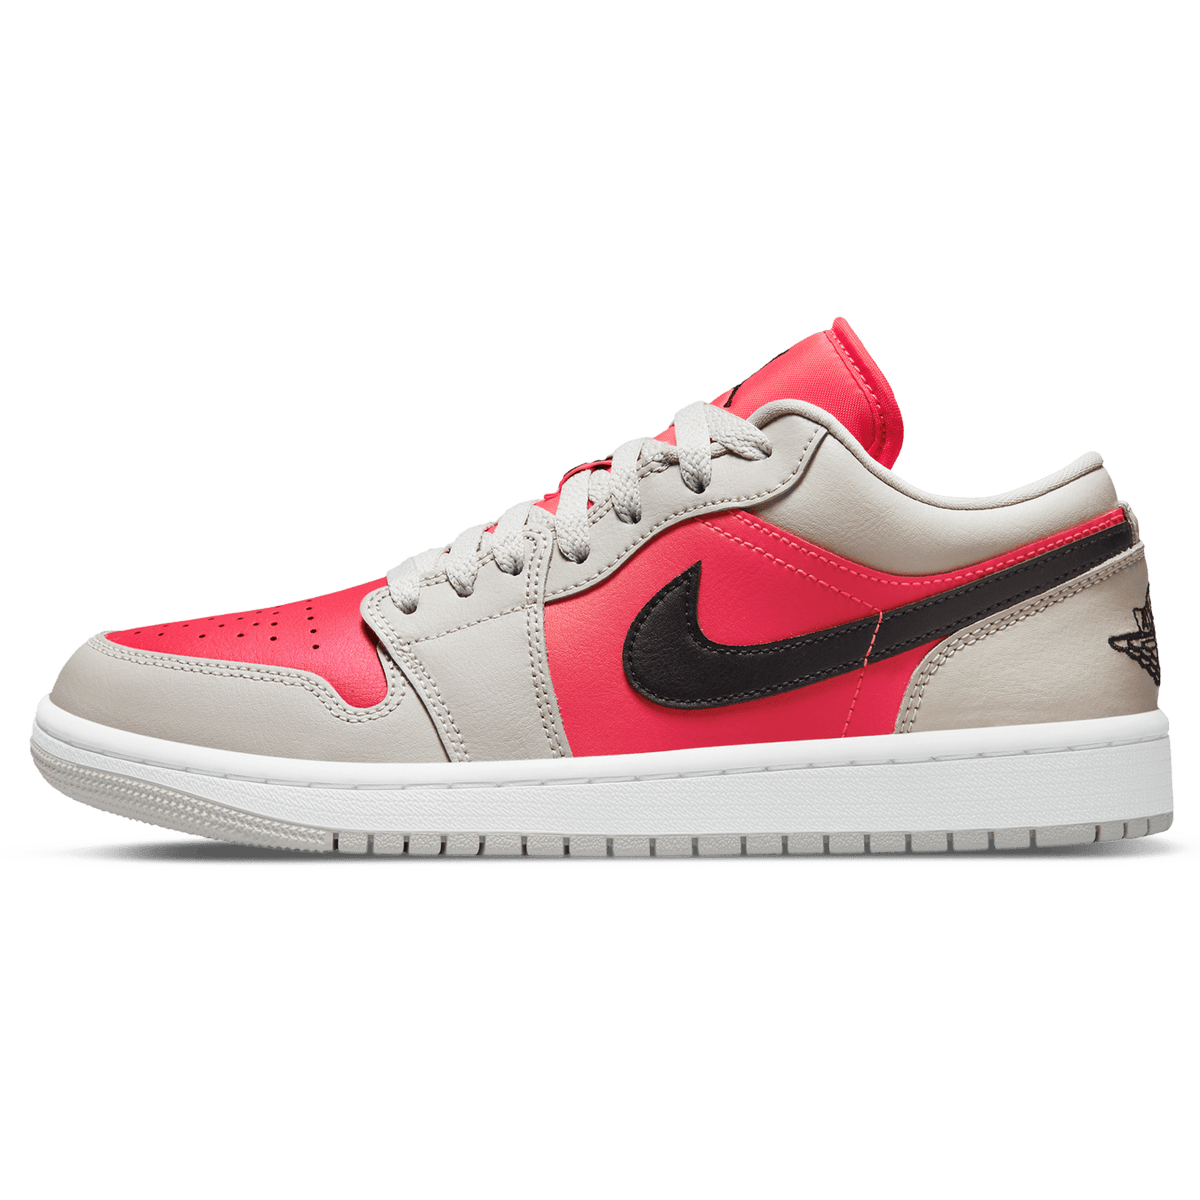 Nike SB Dunk Low Infrared Releasing this Month Low Wmns 'Light Iron Ore Siren Red' - JuzsportsShops